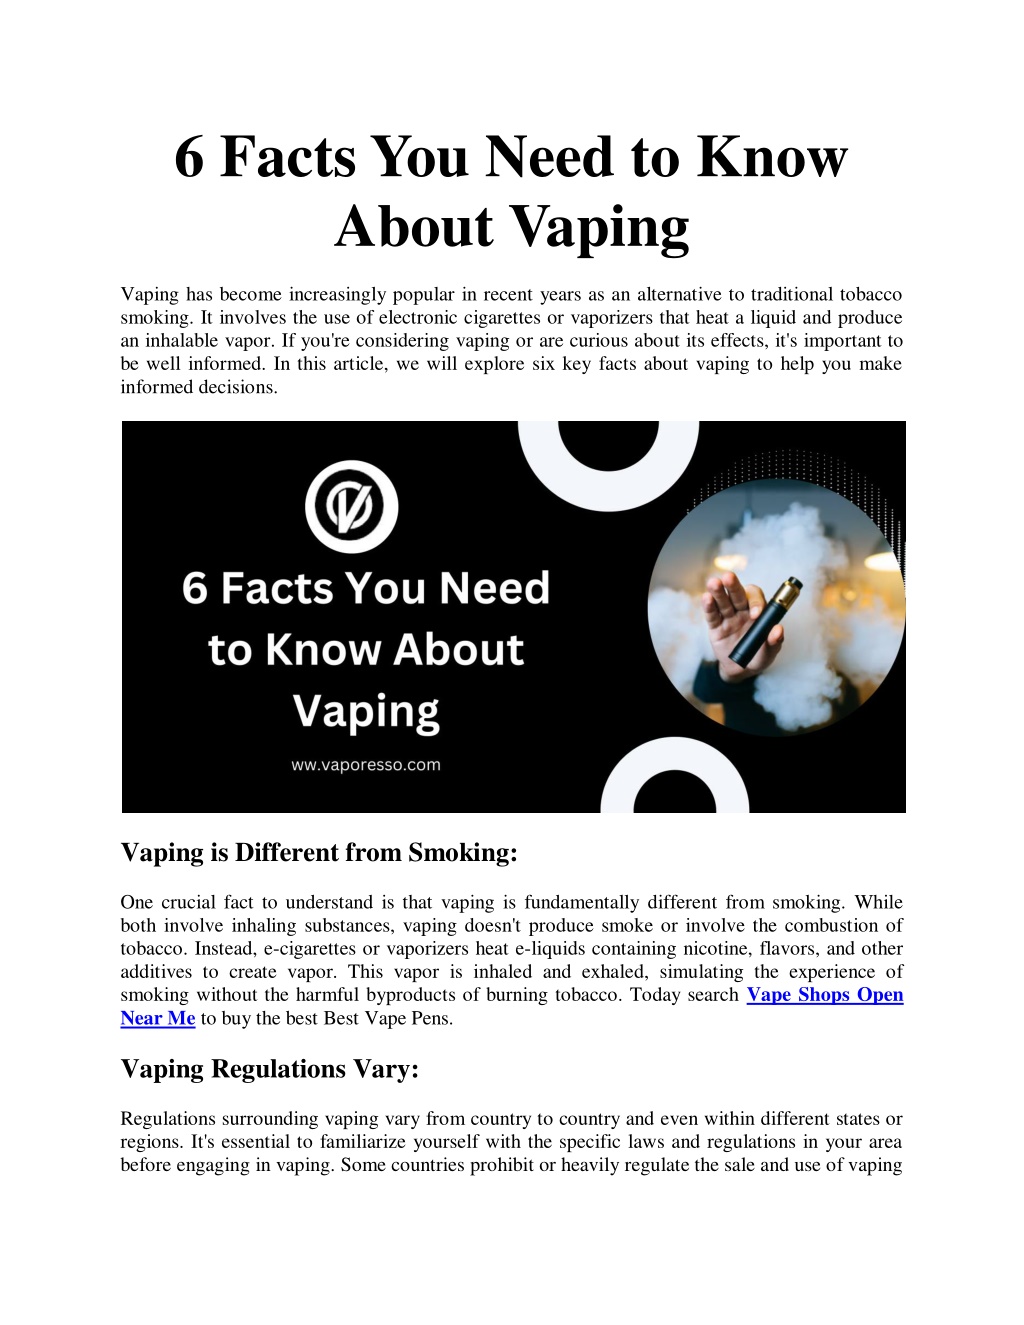 presentation about vaping